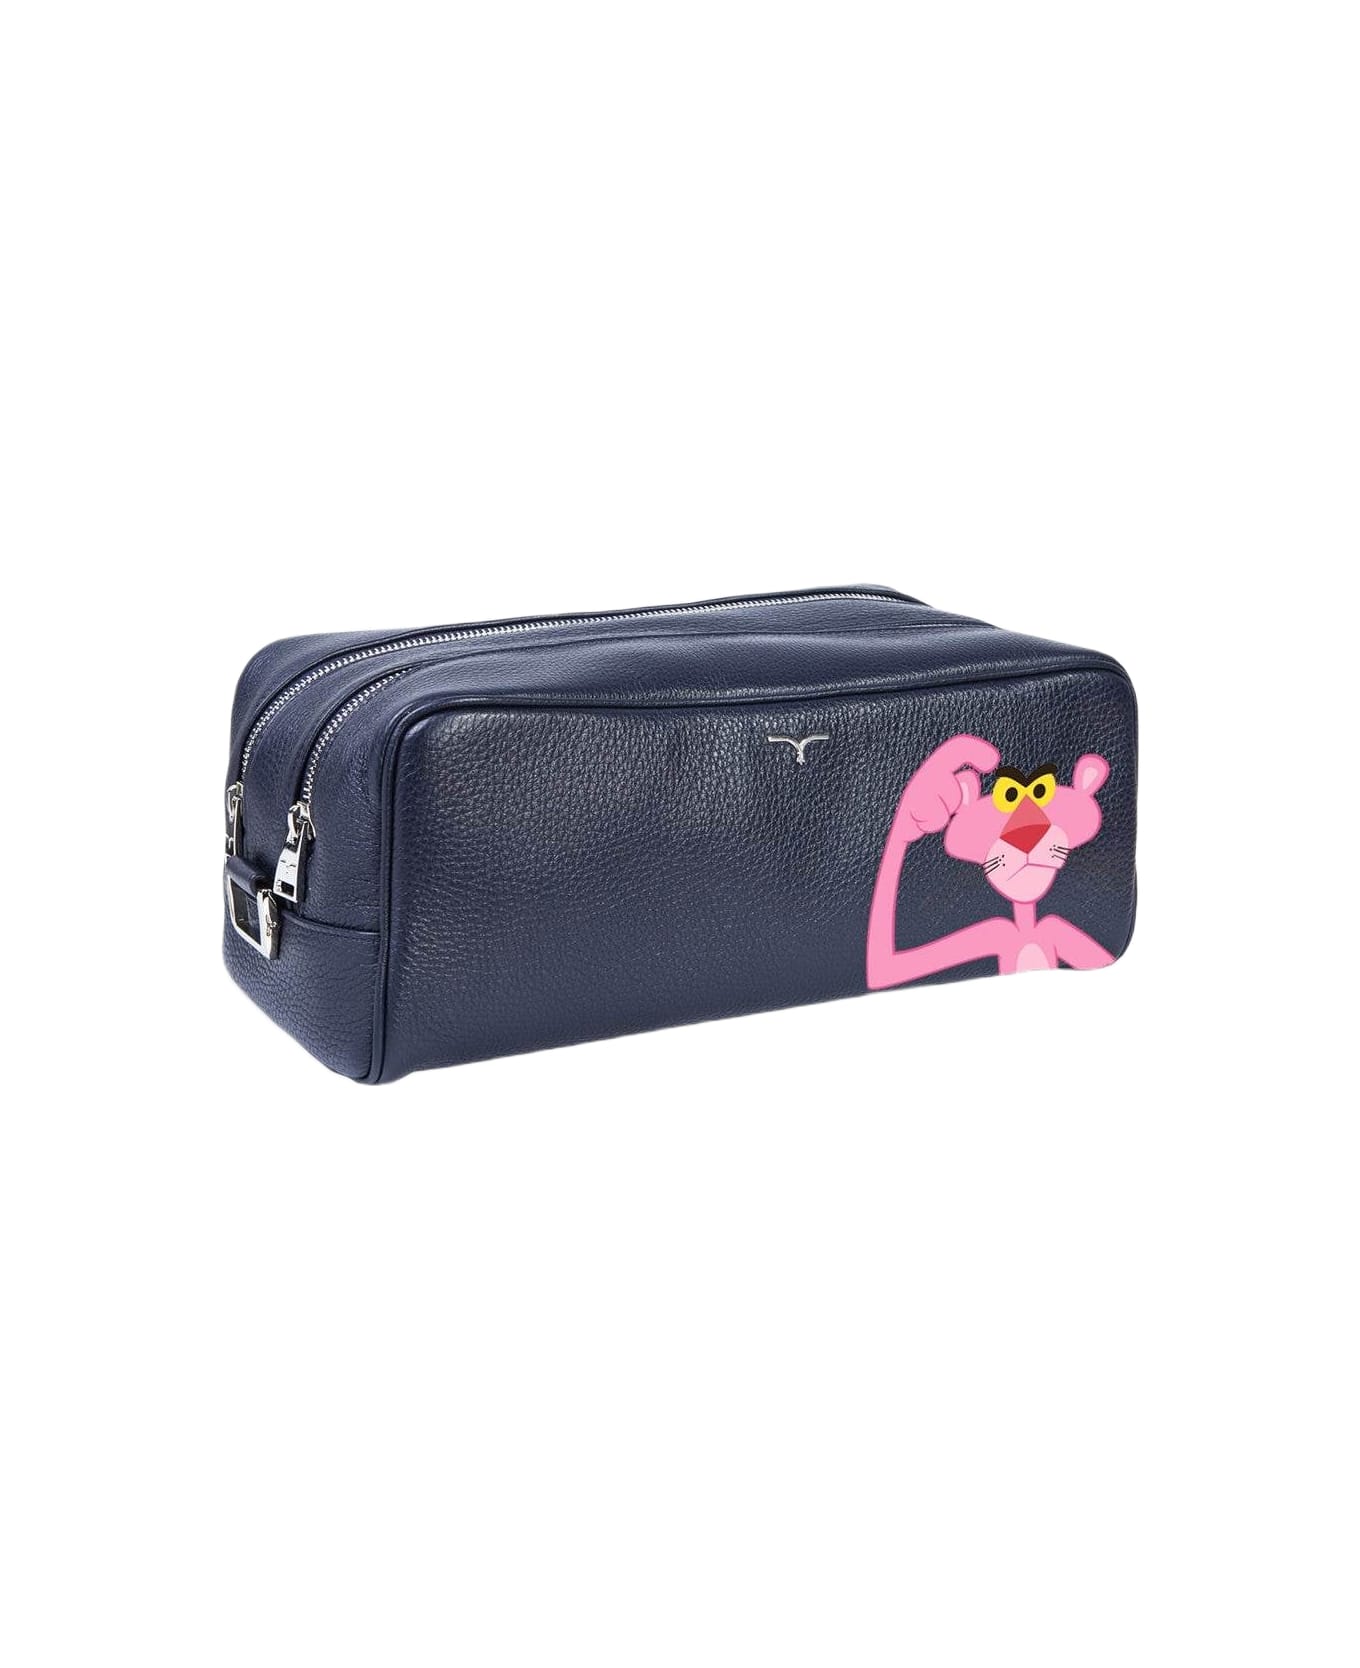 Larusmiani Nécessaire 'pink Panther' Luggage - Navy